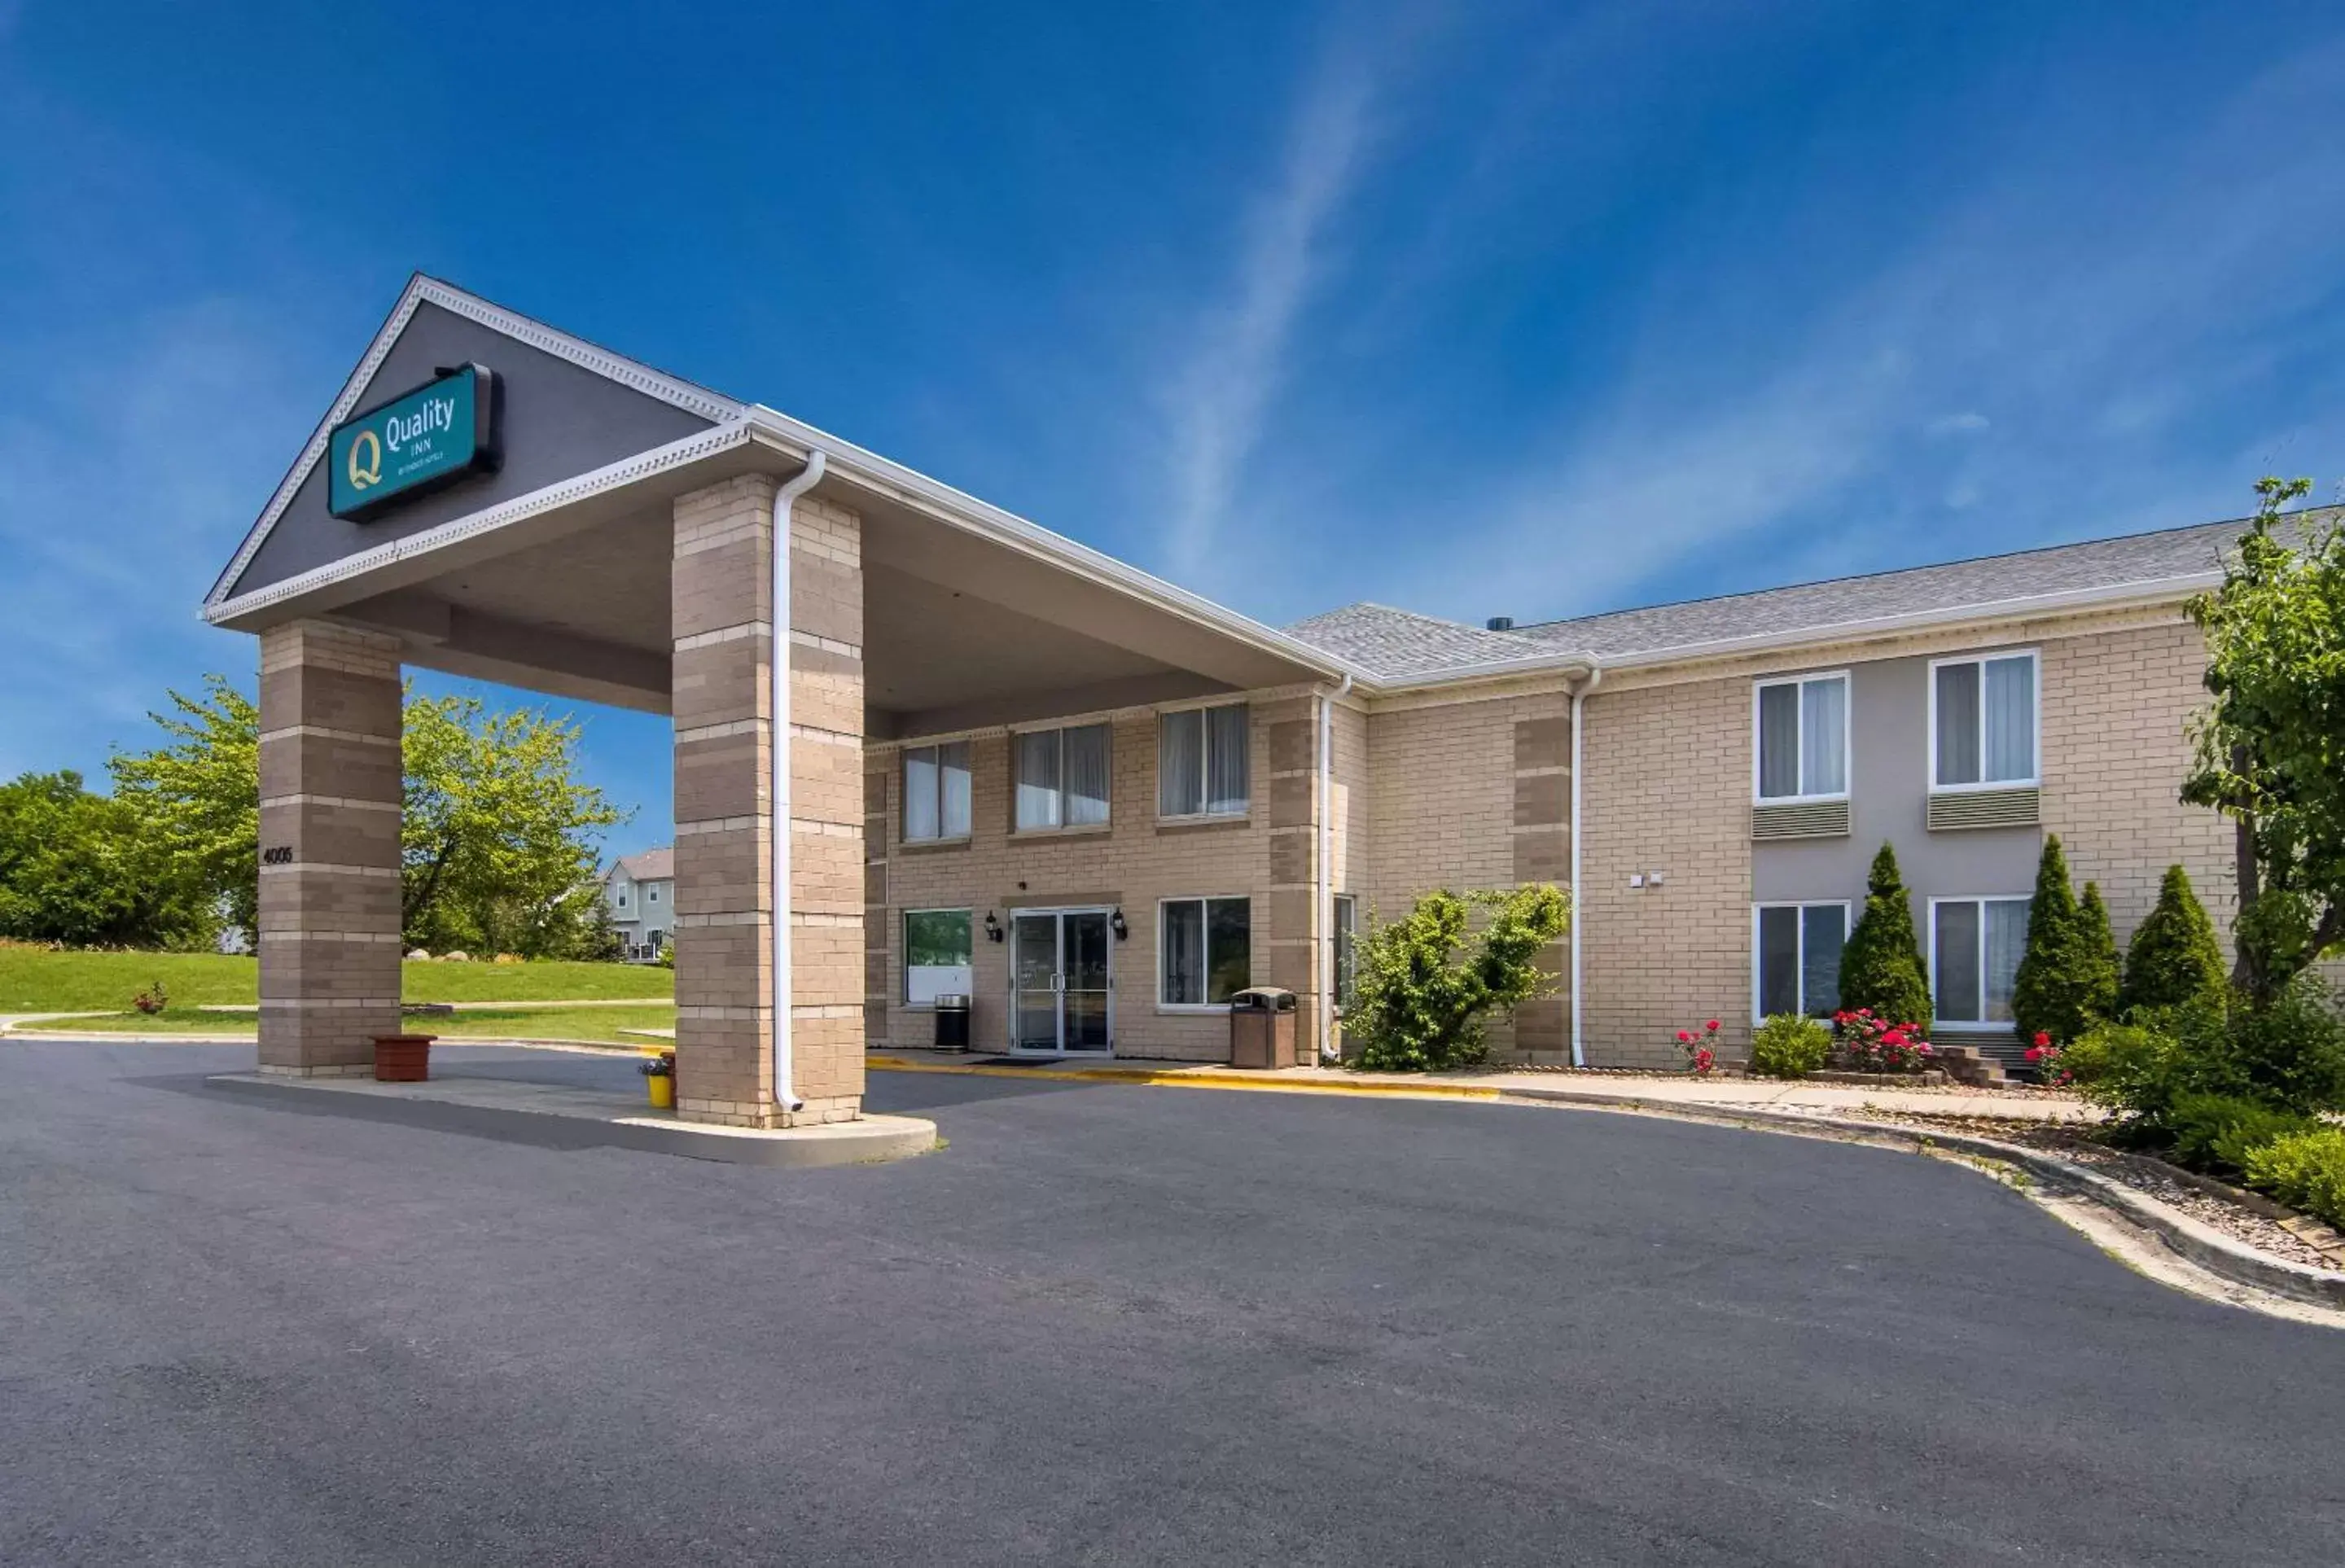 Property Building in Quality Inn Aurora - Naperville Area